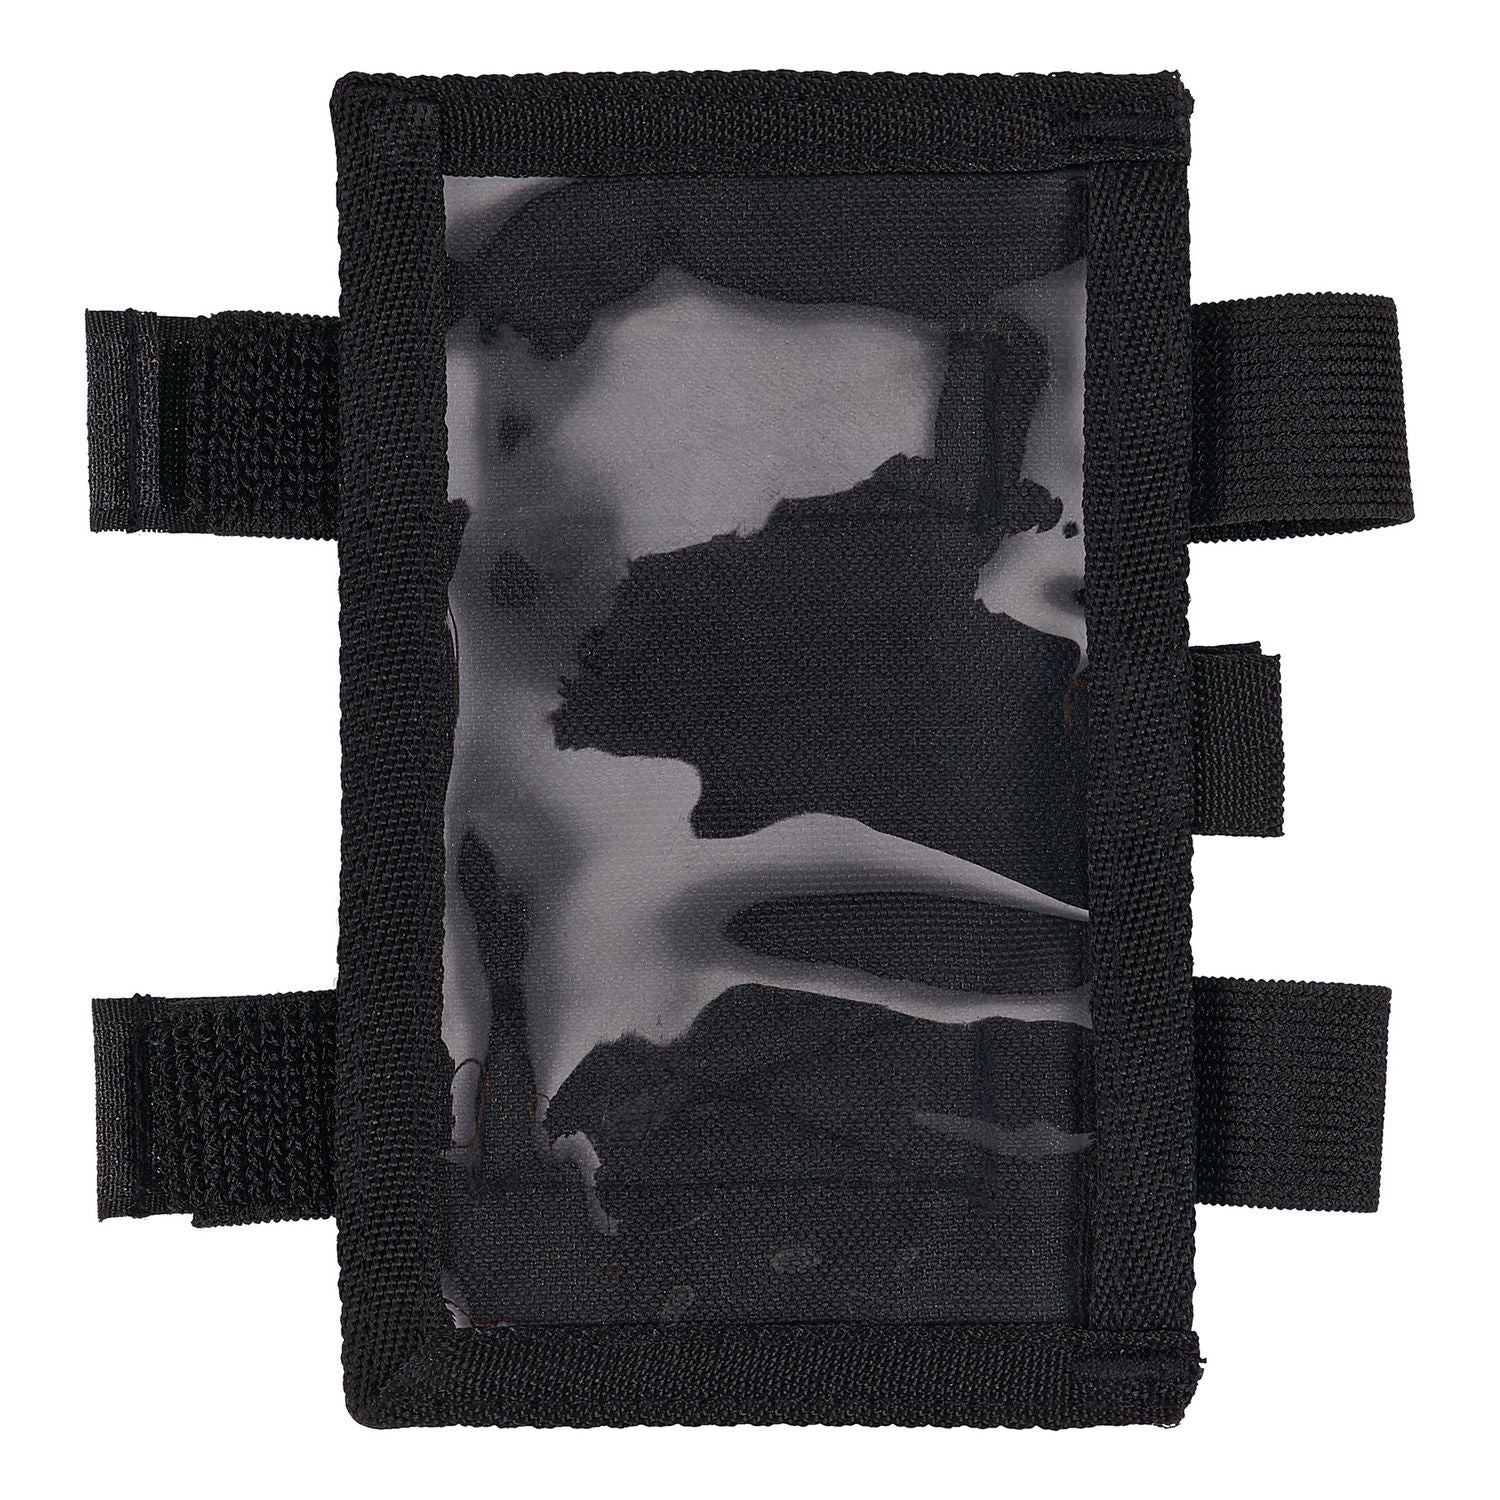 squids-3390-dual-band-arm-id-badge-holder-w-hook-loop-vertical-black-375-x-575-275-x-475-insert-ships-in-1-3-bus-days_ego19966 - 1